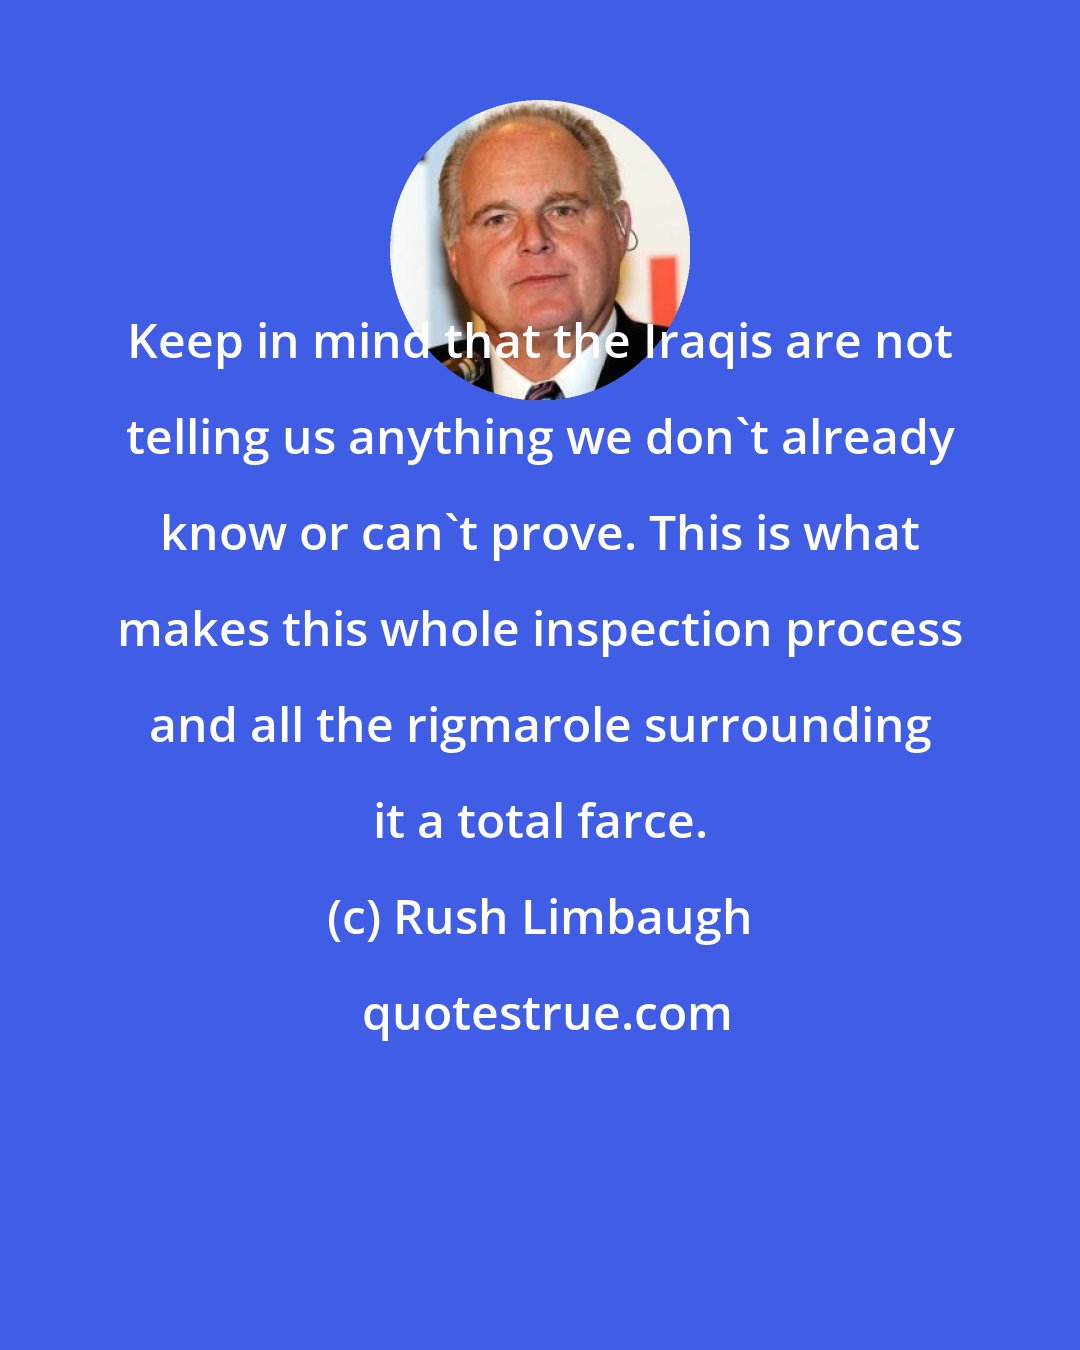 Rush Limbaugh: Keep in mind that the Iraqis are not telling us anything we don't already know or can't prove. This is what makes this whole inspection process and all the rigmarole surrounding it a total farce.